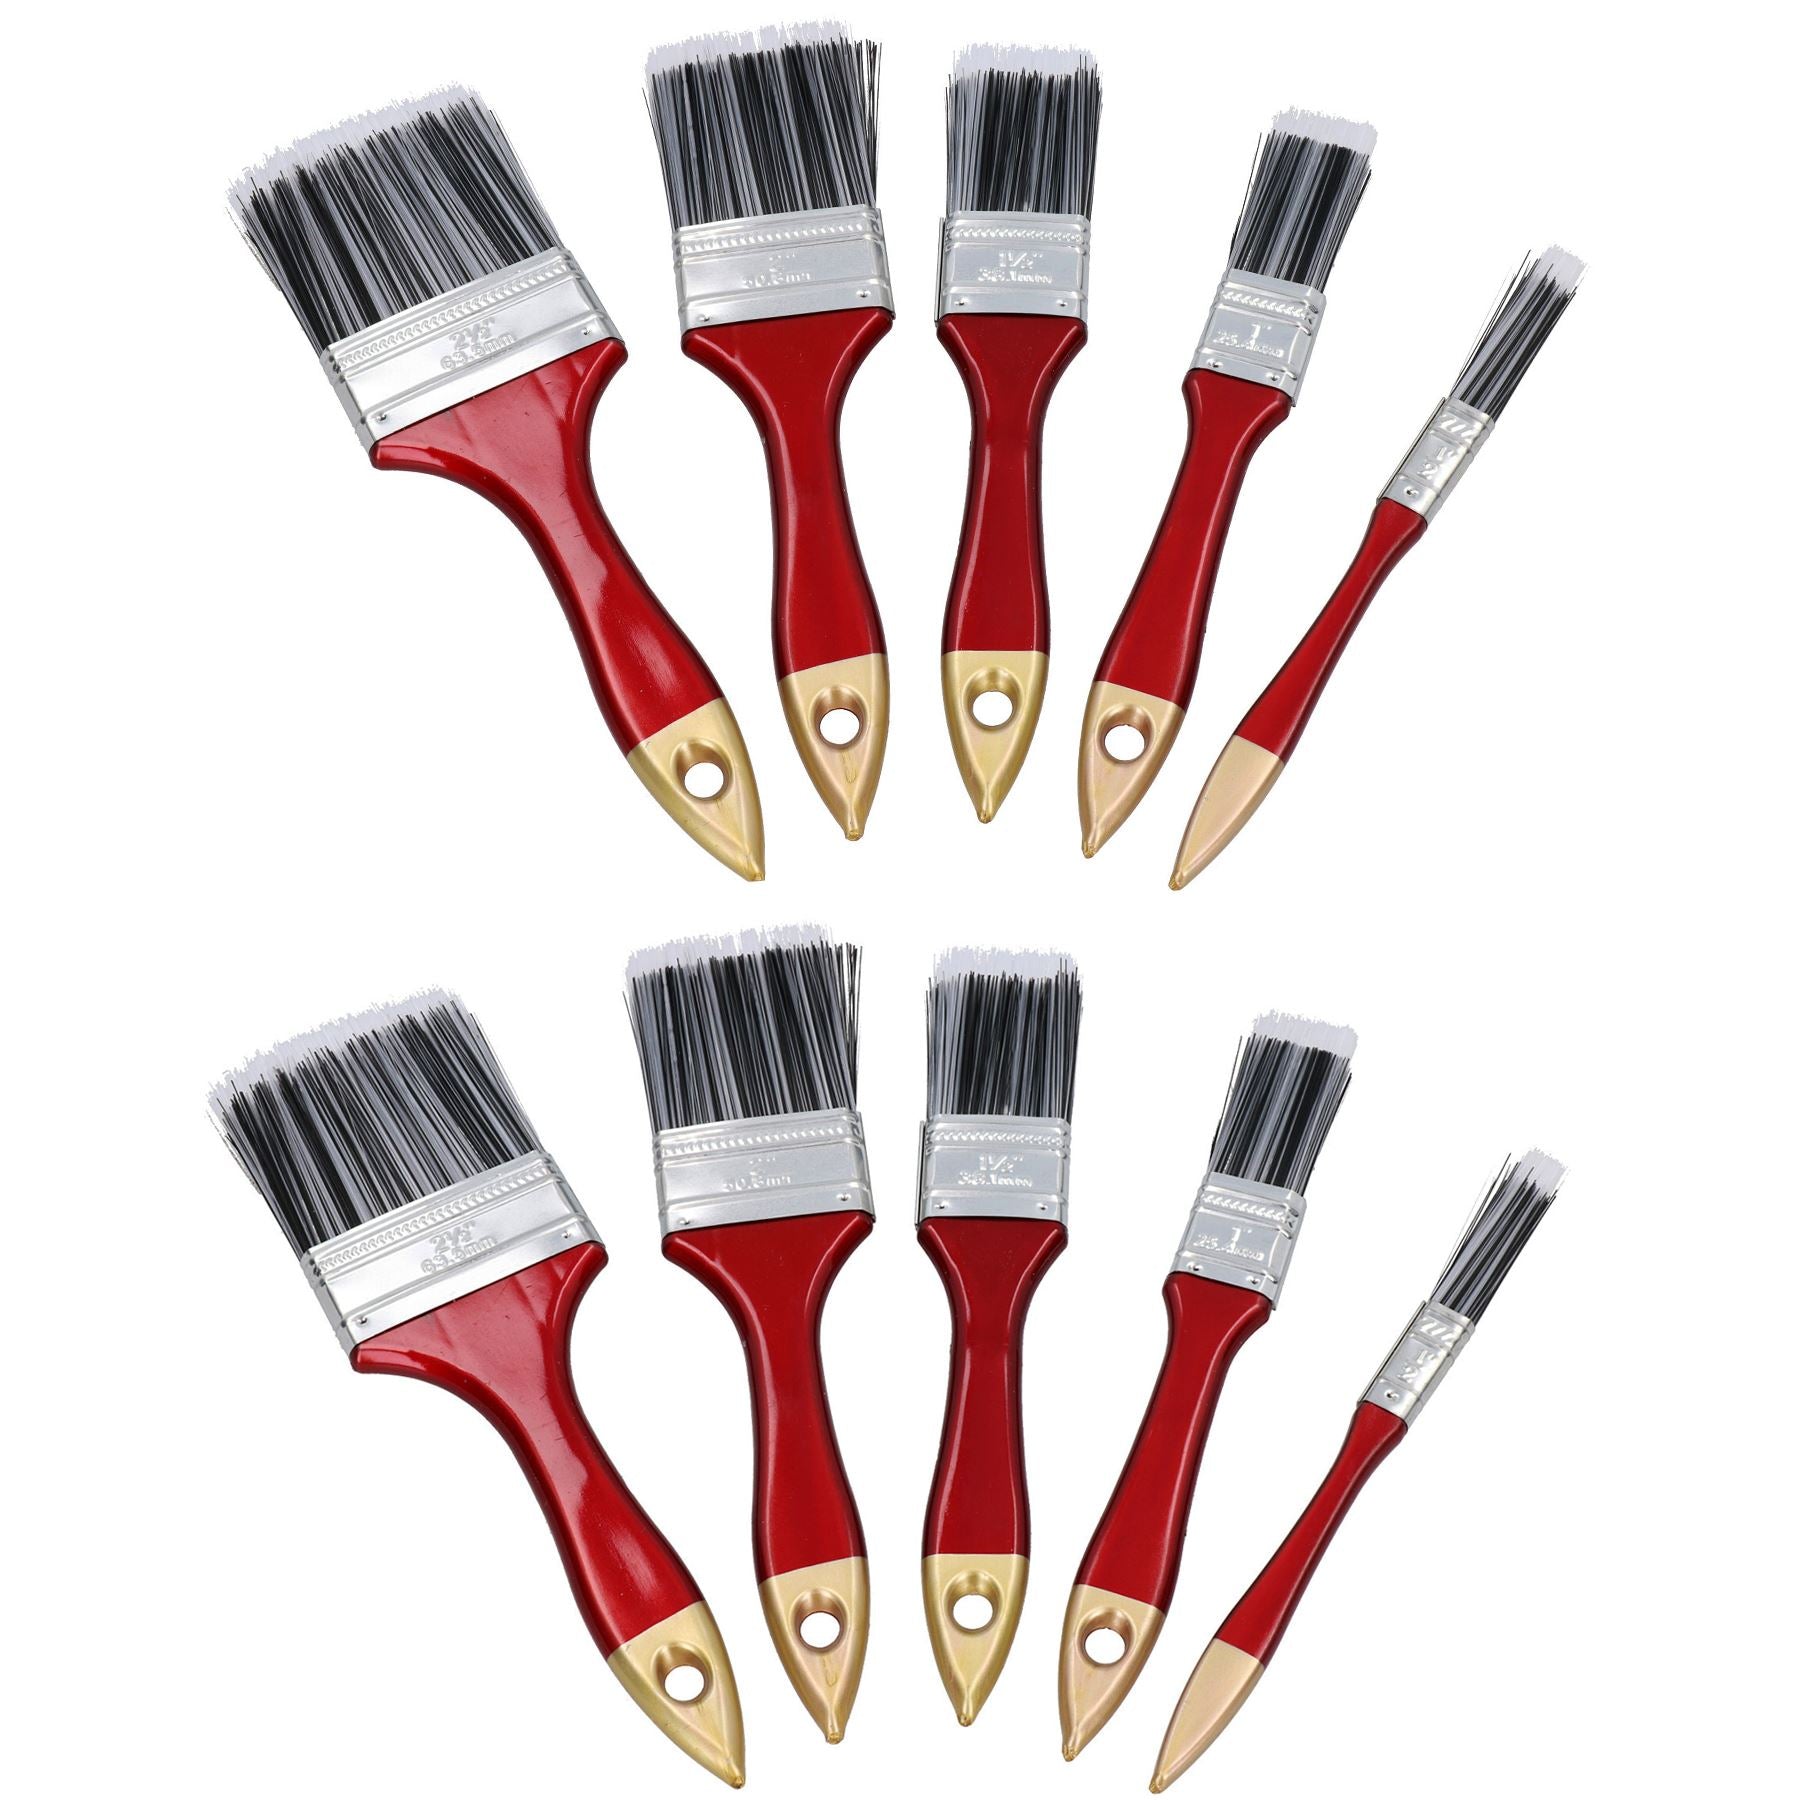 Painting and Decorating Synthetic Paint Brush Brushes Set 1” – 2.5” Width